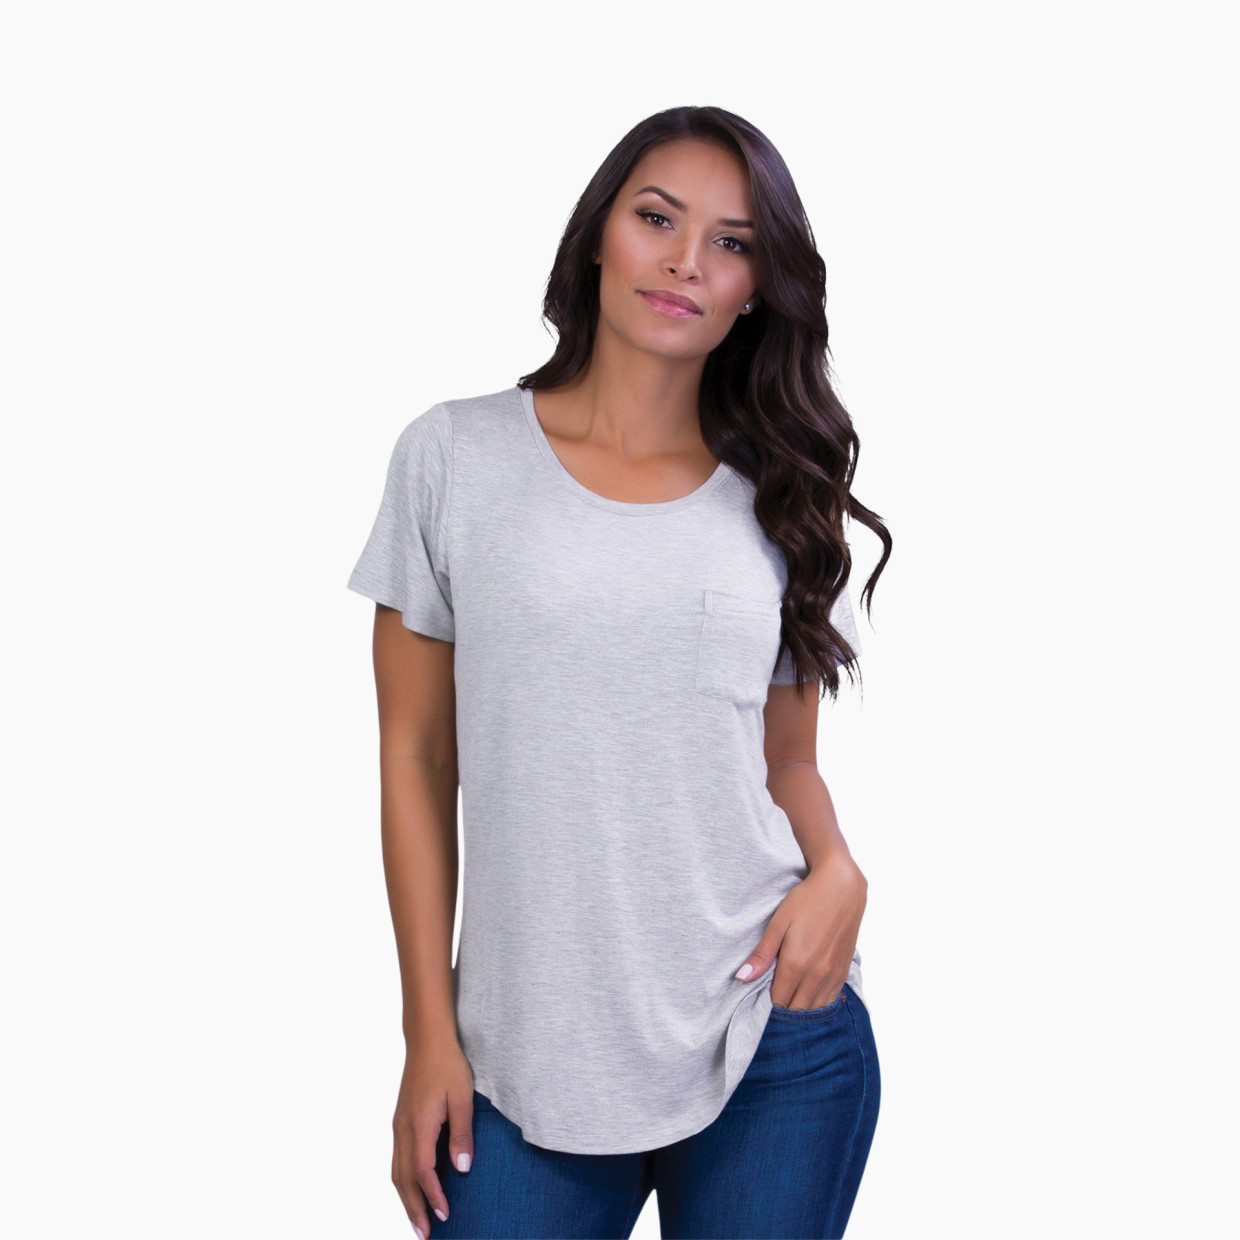 Belly Bandit Perfect Nursing Tee - Heather Grey, Small.